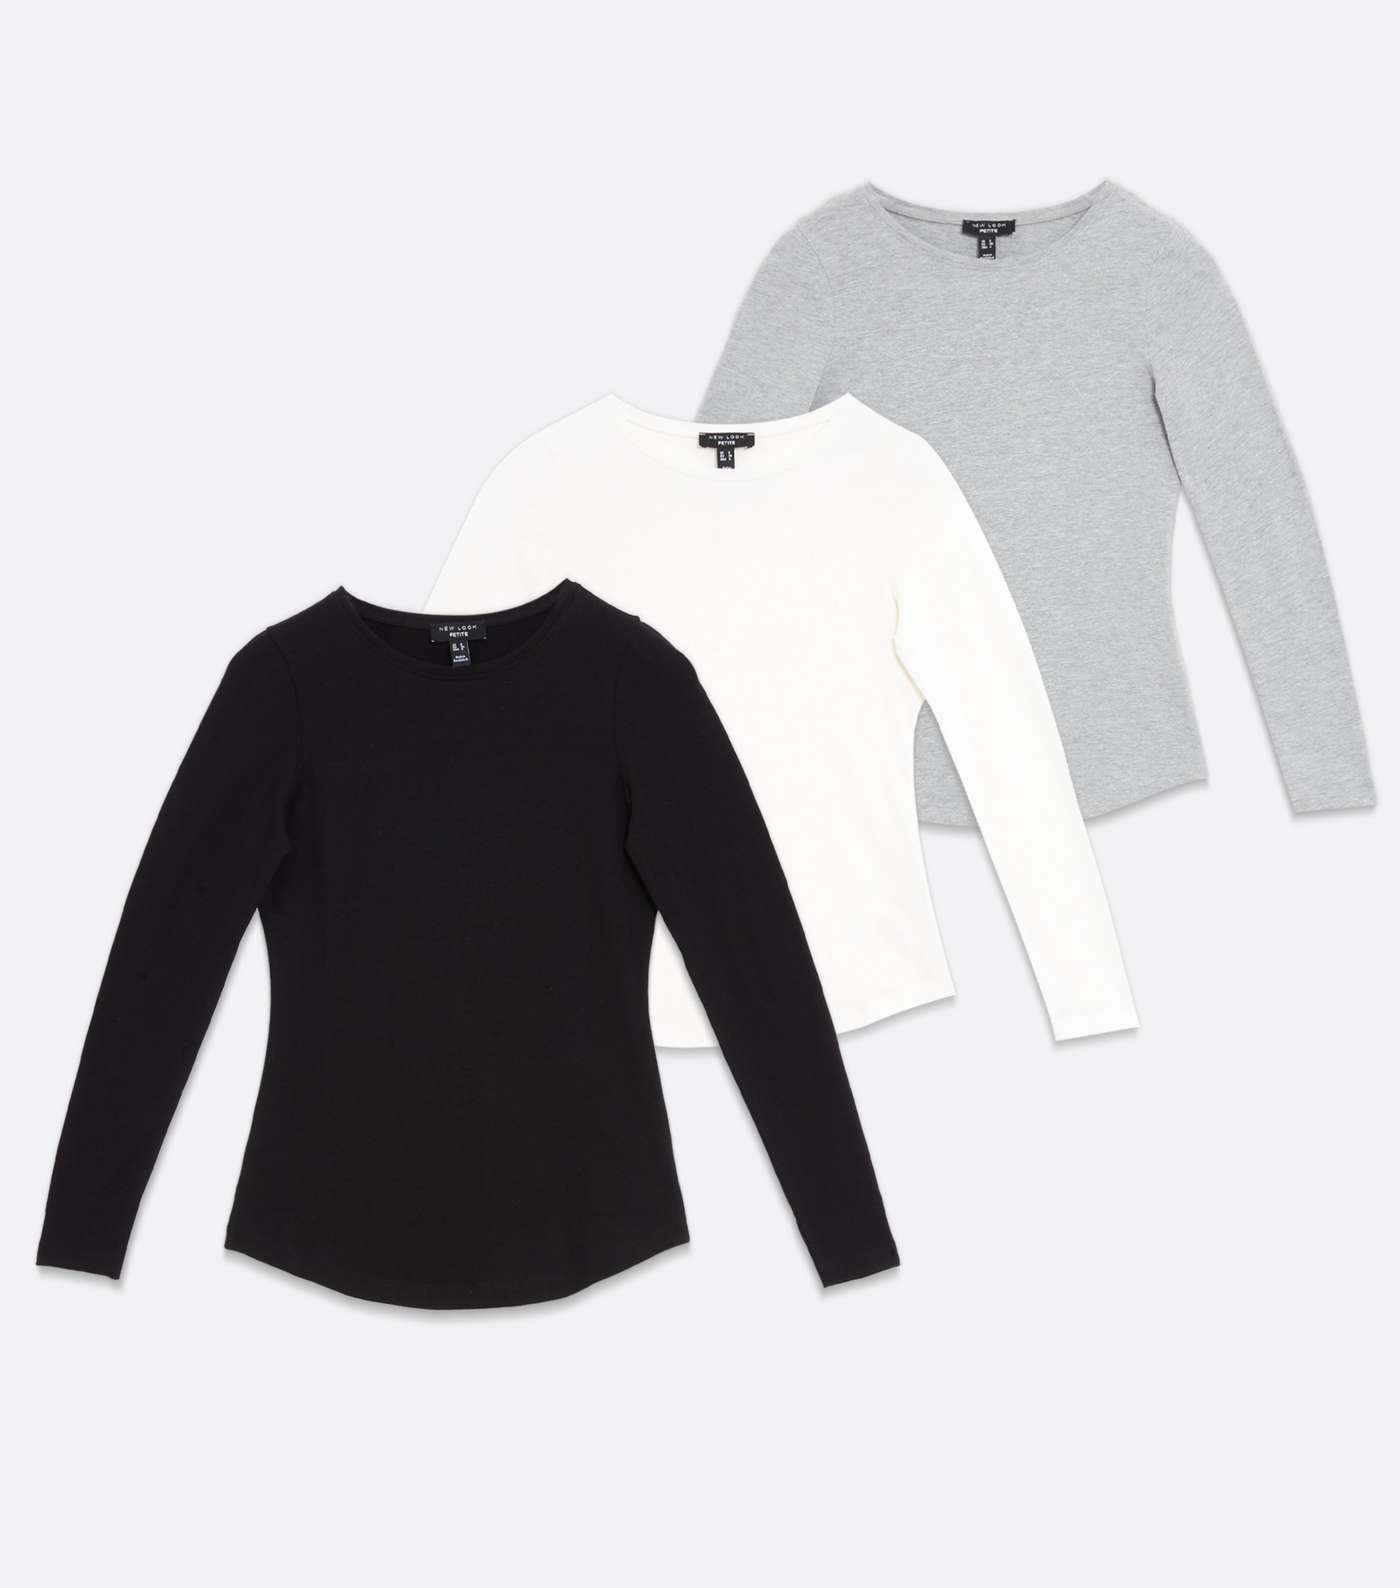 Petite 3 Pack Black White and Grey Long Sleeve Crew Tops Image 5